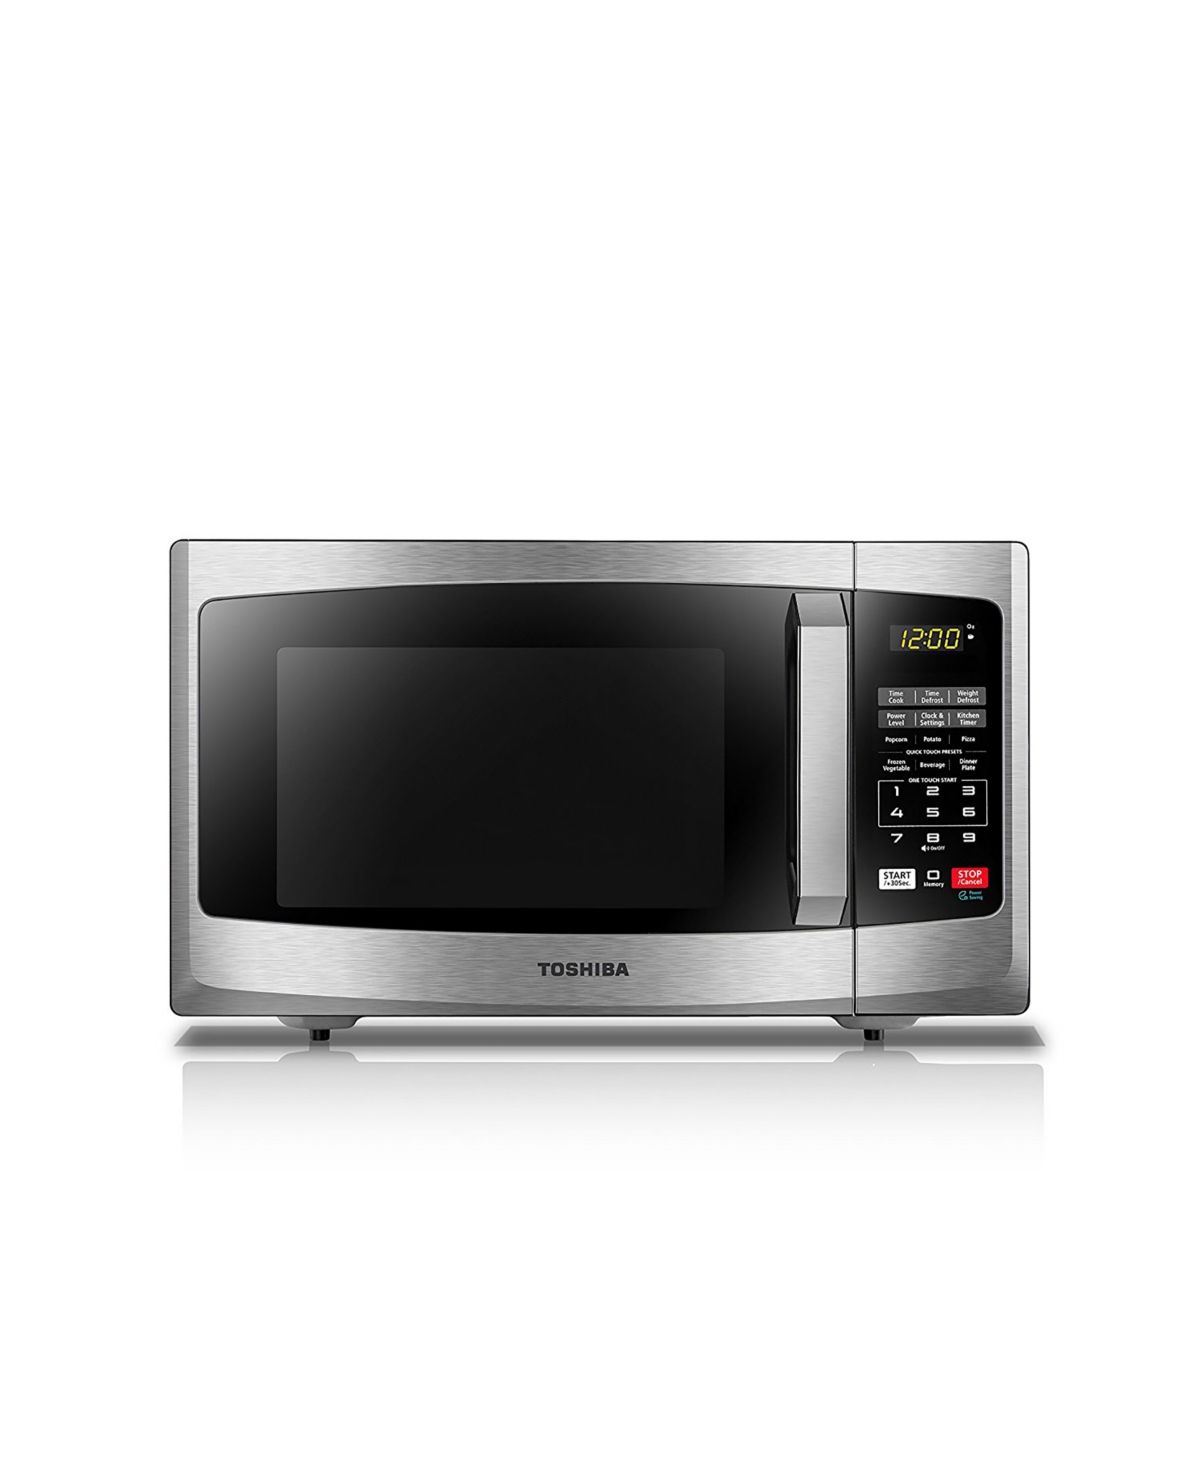 Toshiba 0.9 Cubic Feet Microwave In Stainless Steel